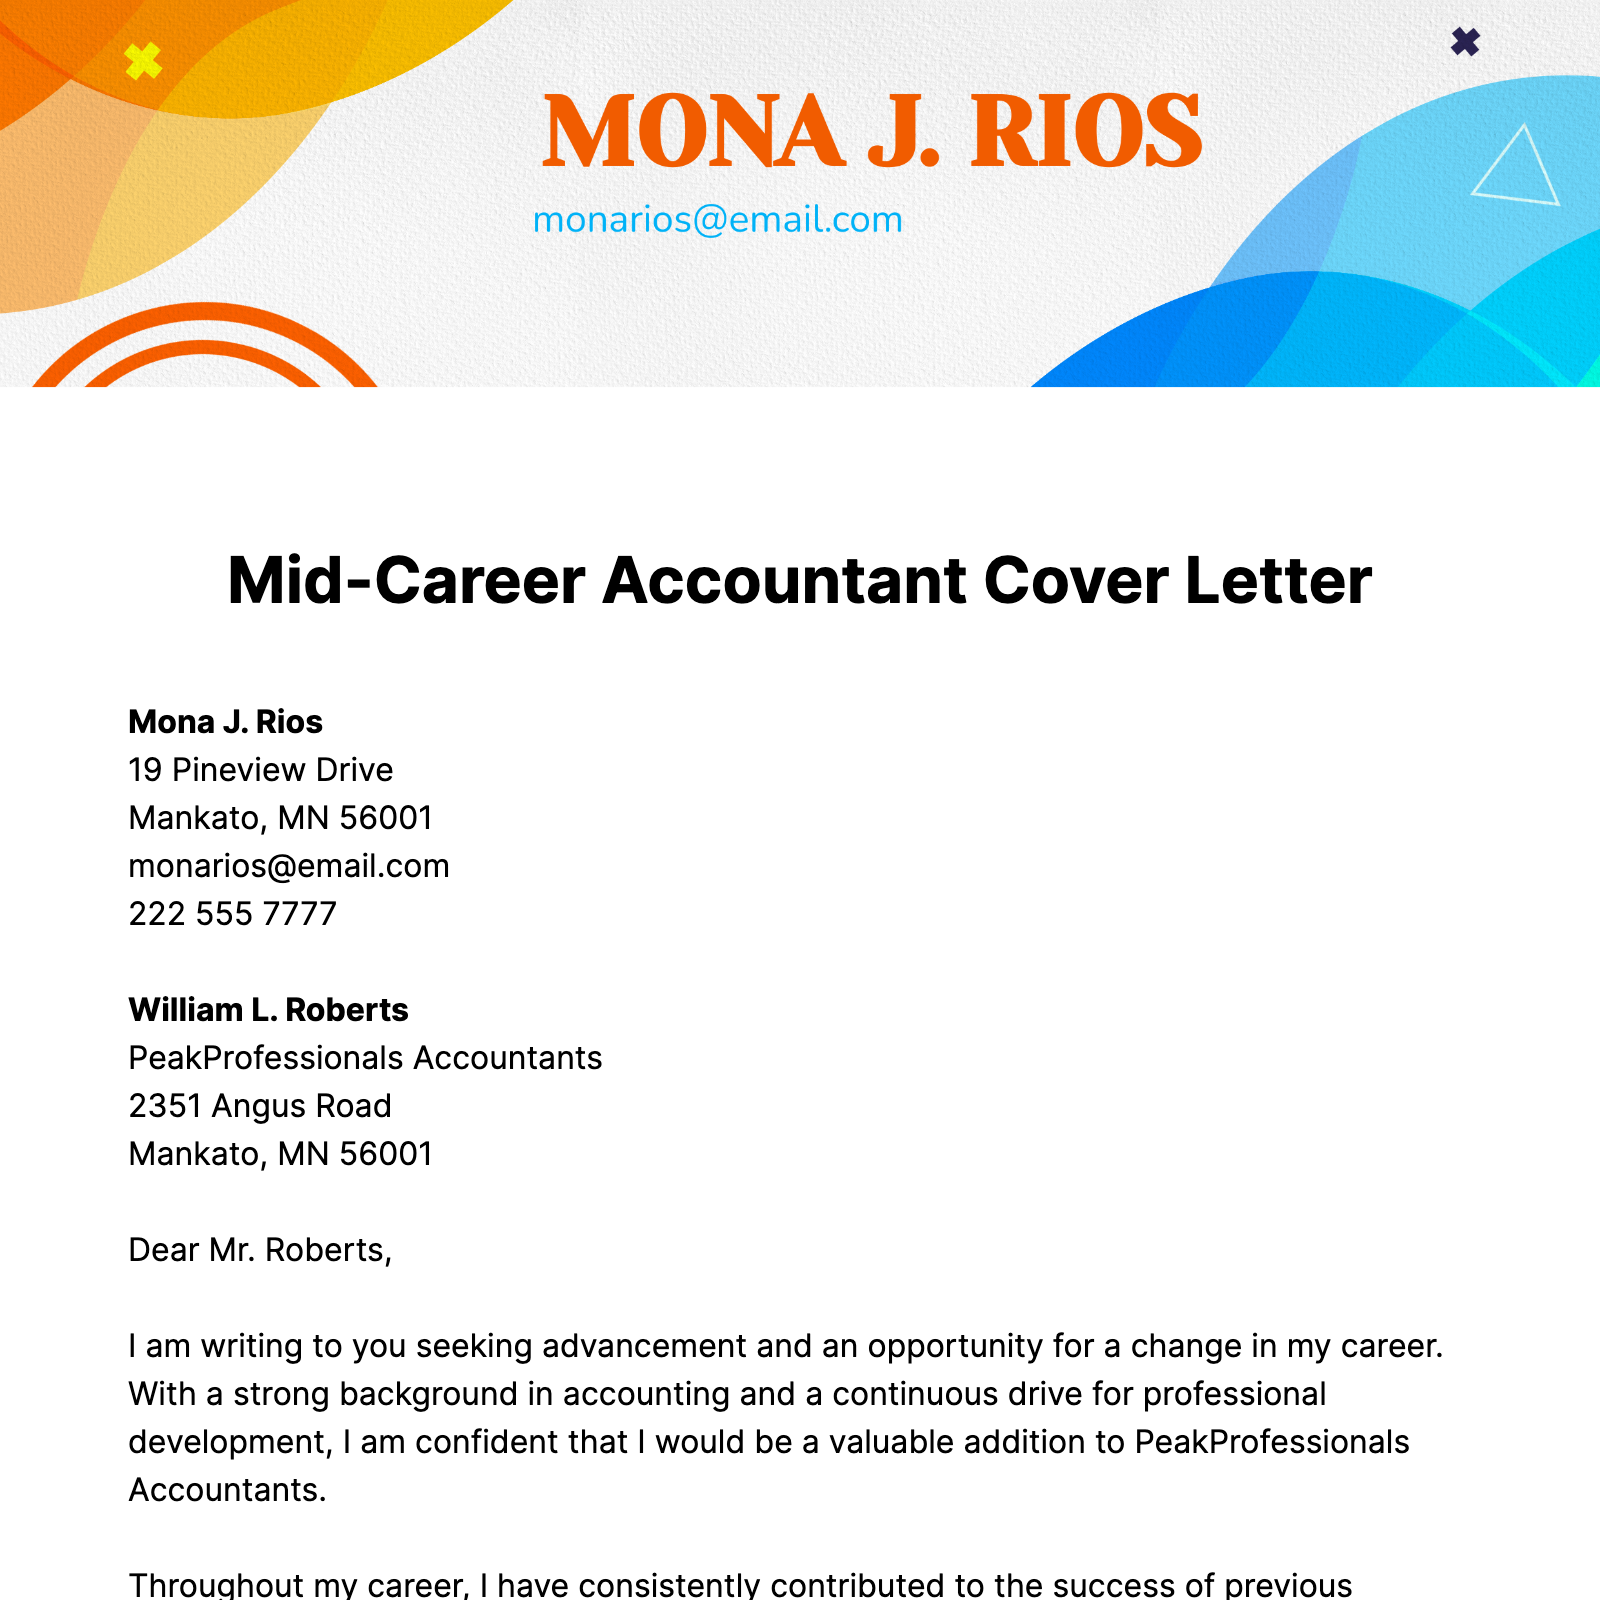 Mid-Career Accountant Cover Letter Template